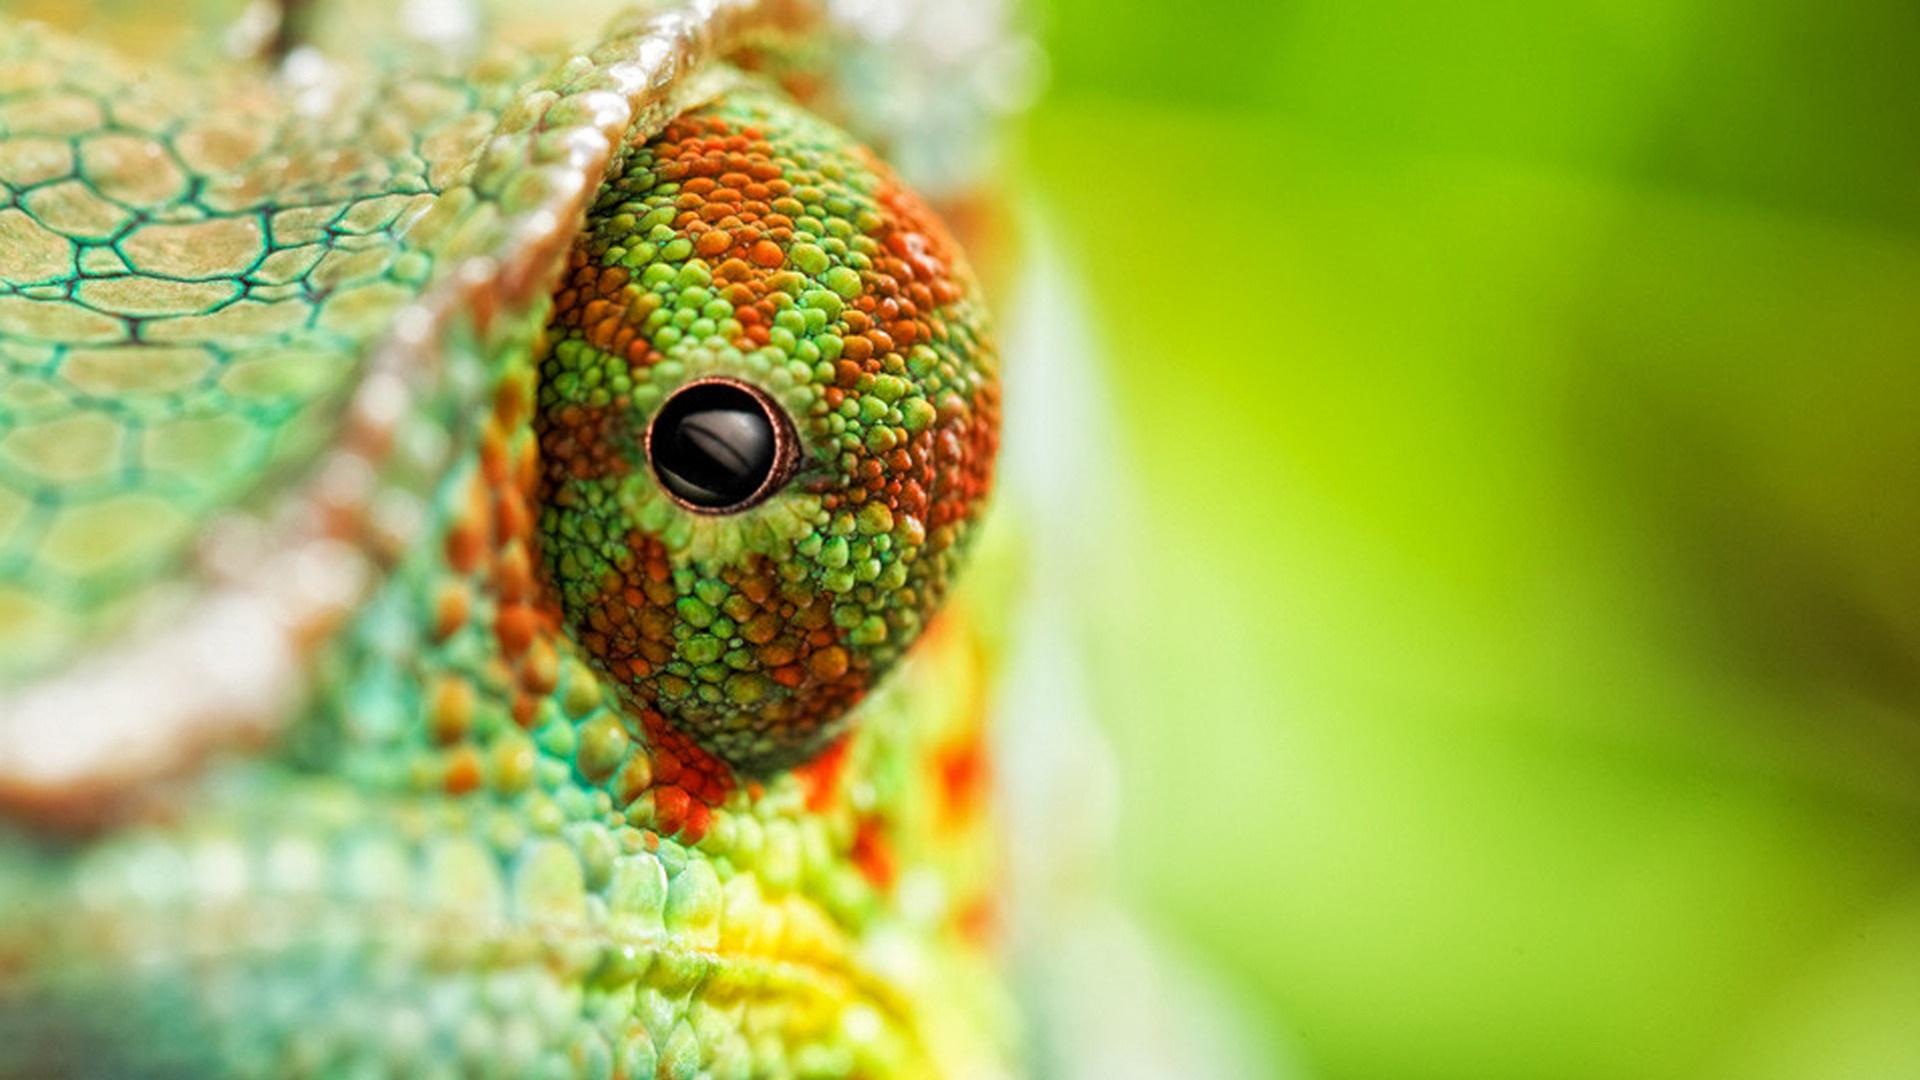 lizards image Chameleon HD wallpaper and background photo